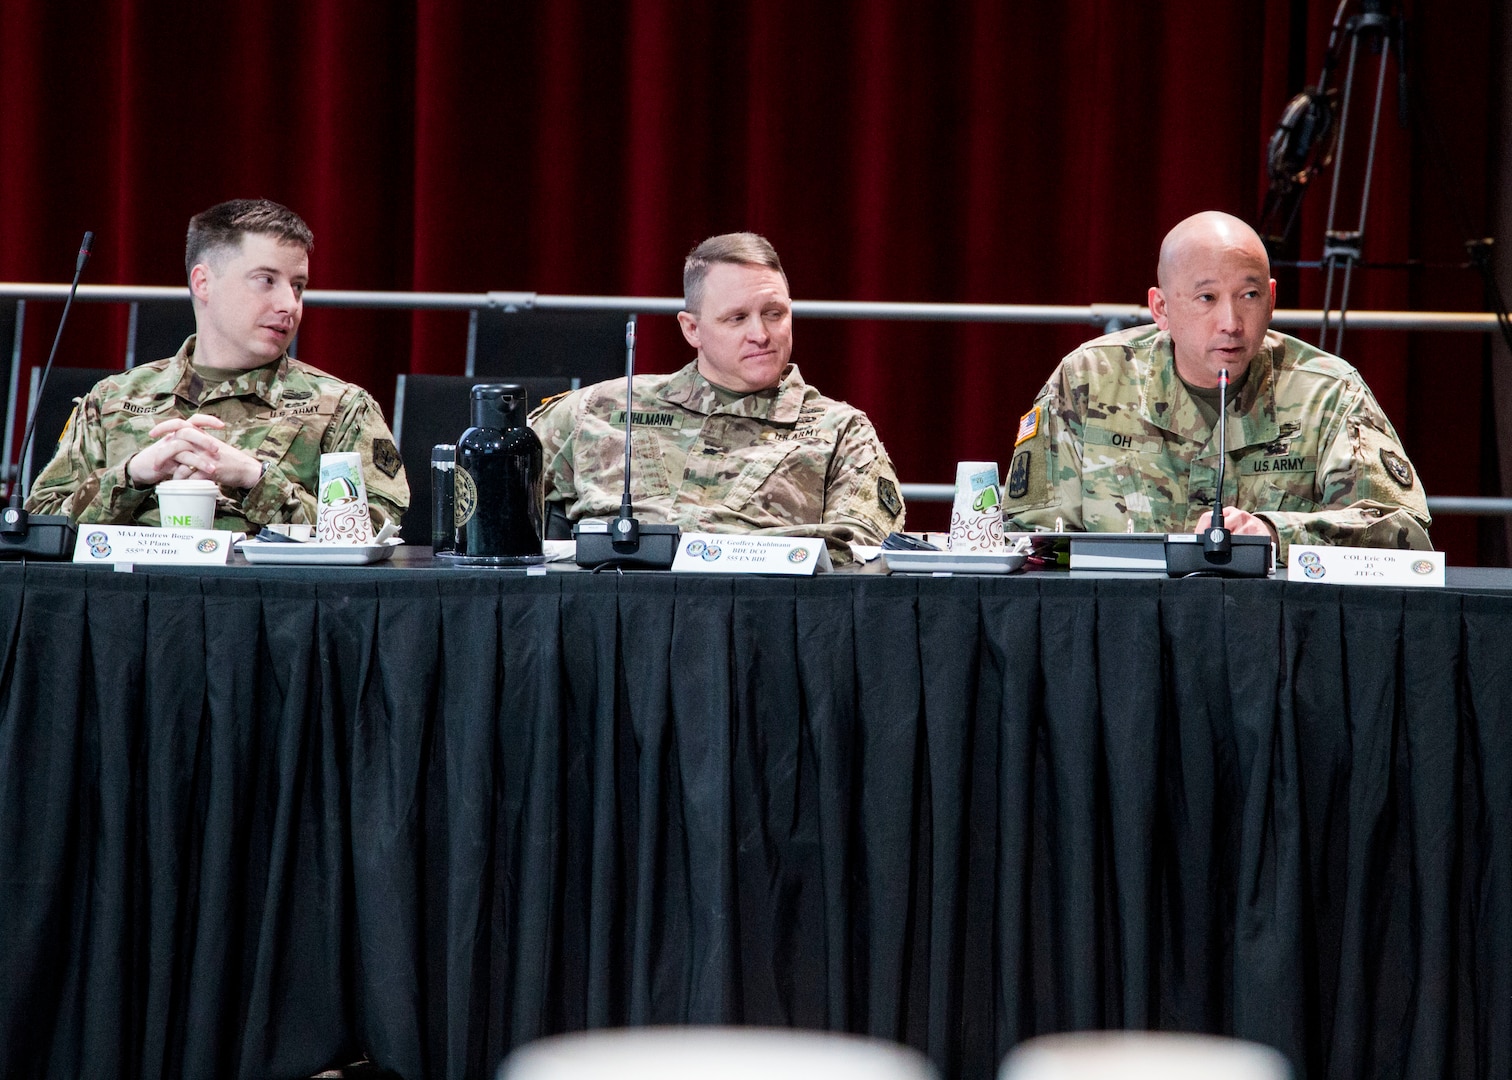 FORT EUSTIS, Va. -- U.S. Army Col. Eric Oh lends his perspective during the 2018 Defense Chemical, Biological, Radiological and Nuclear Response (DCRF) Commanders Conference at the Jacob's Conference Center at Fort Langley Eustis, Va. The three-day conference allowed Joint Task Force Civil Support (JTF-CS) and DCRF leadership to review how thousands of military service members would respond to a catastrophic disaster in the U.S, whether manmade or natural.  JTF-CS provides command and control for designated Department of Defense specialized response forces to assist local, state, federal and tribal partners in saving lives, preventing further injury, and providing critical support to enable community recovery.